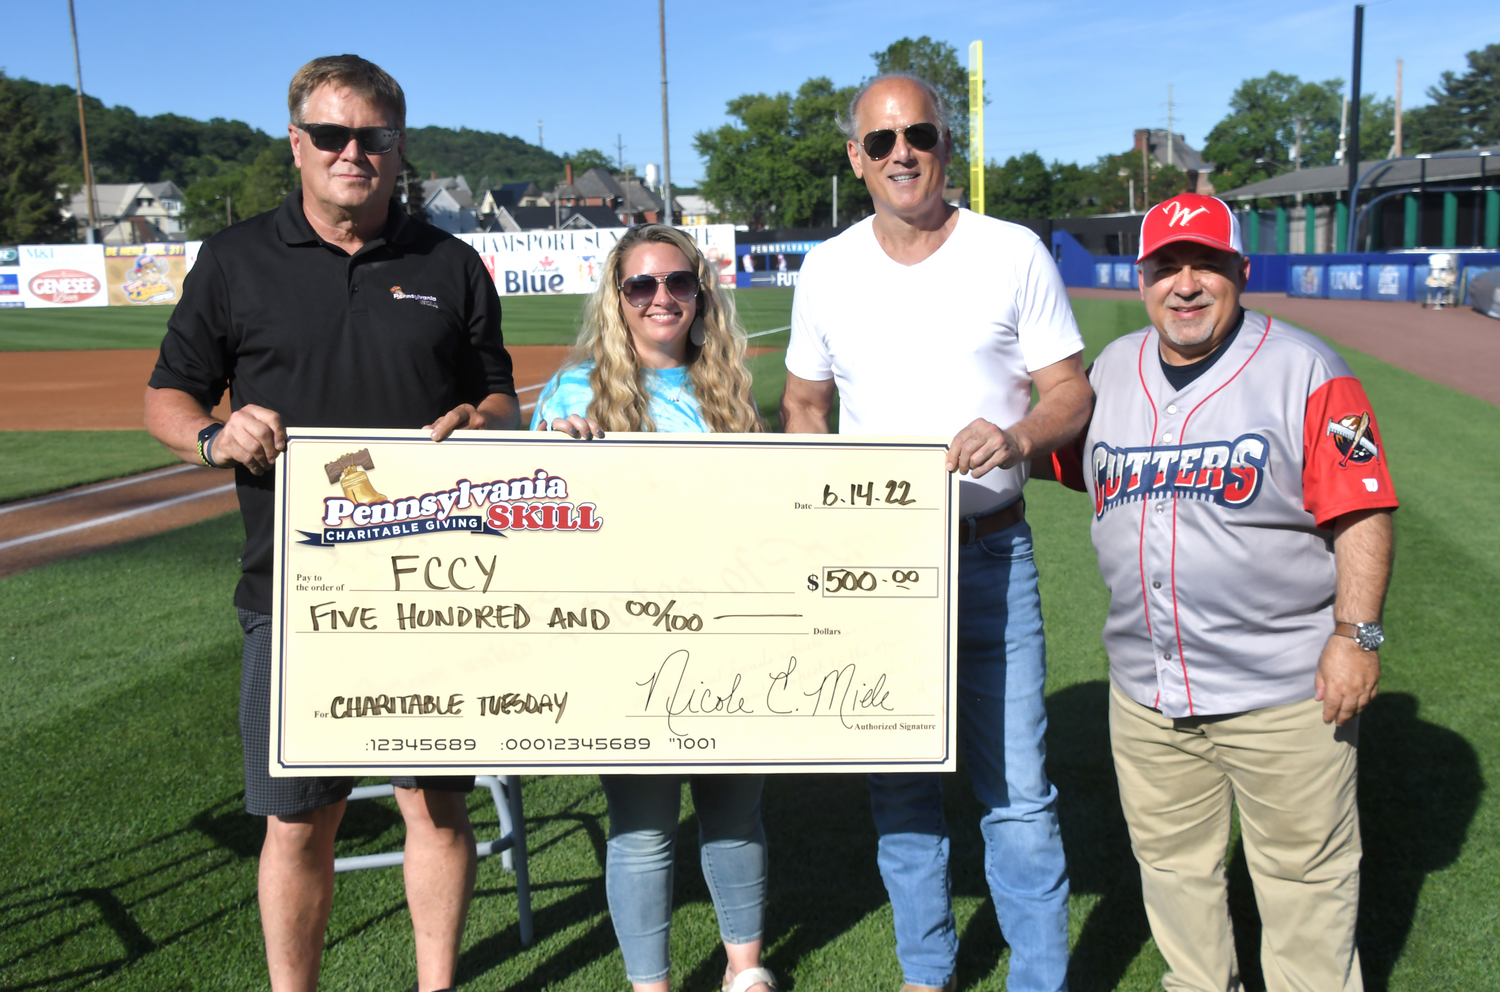 Pennsylvania Skill (PA Skill) is an annual sponsor of the Charitable Tuesday events held at the Williamsport Crosscutters Minor League Baseball Stadium